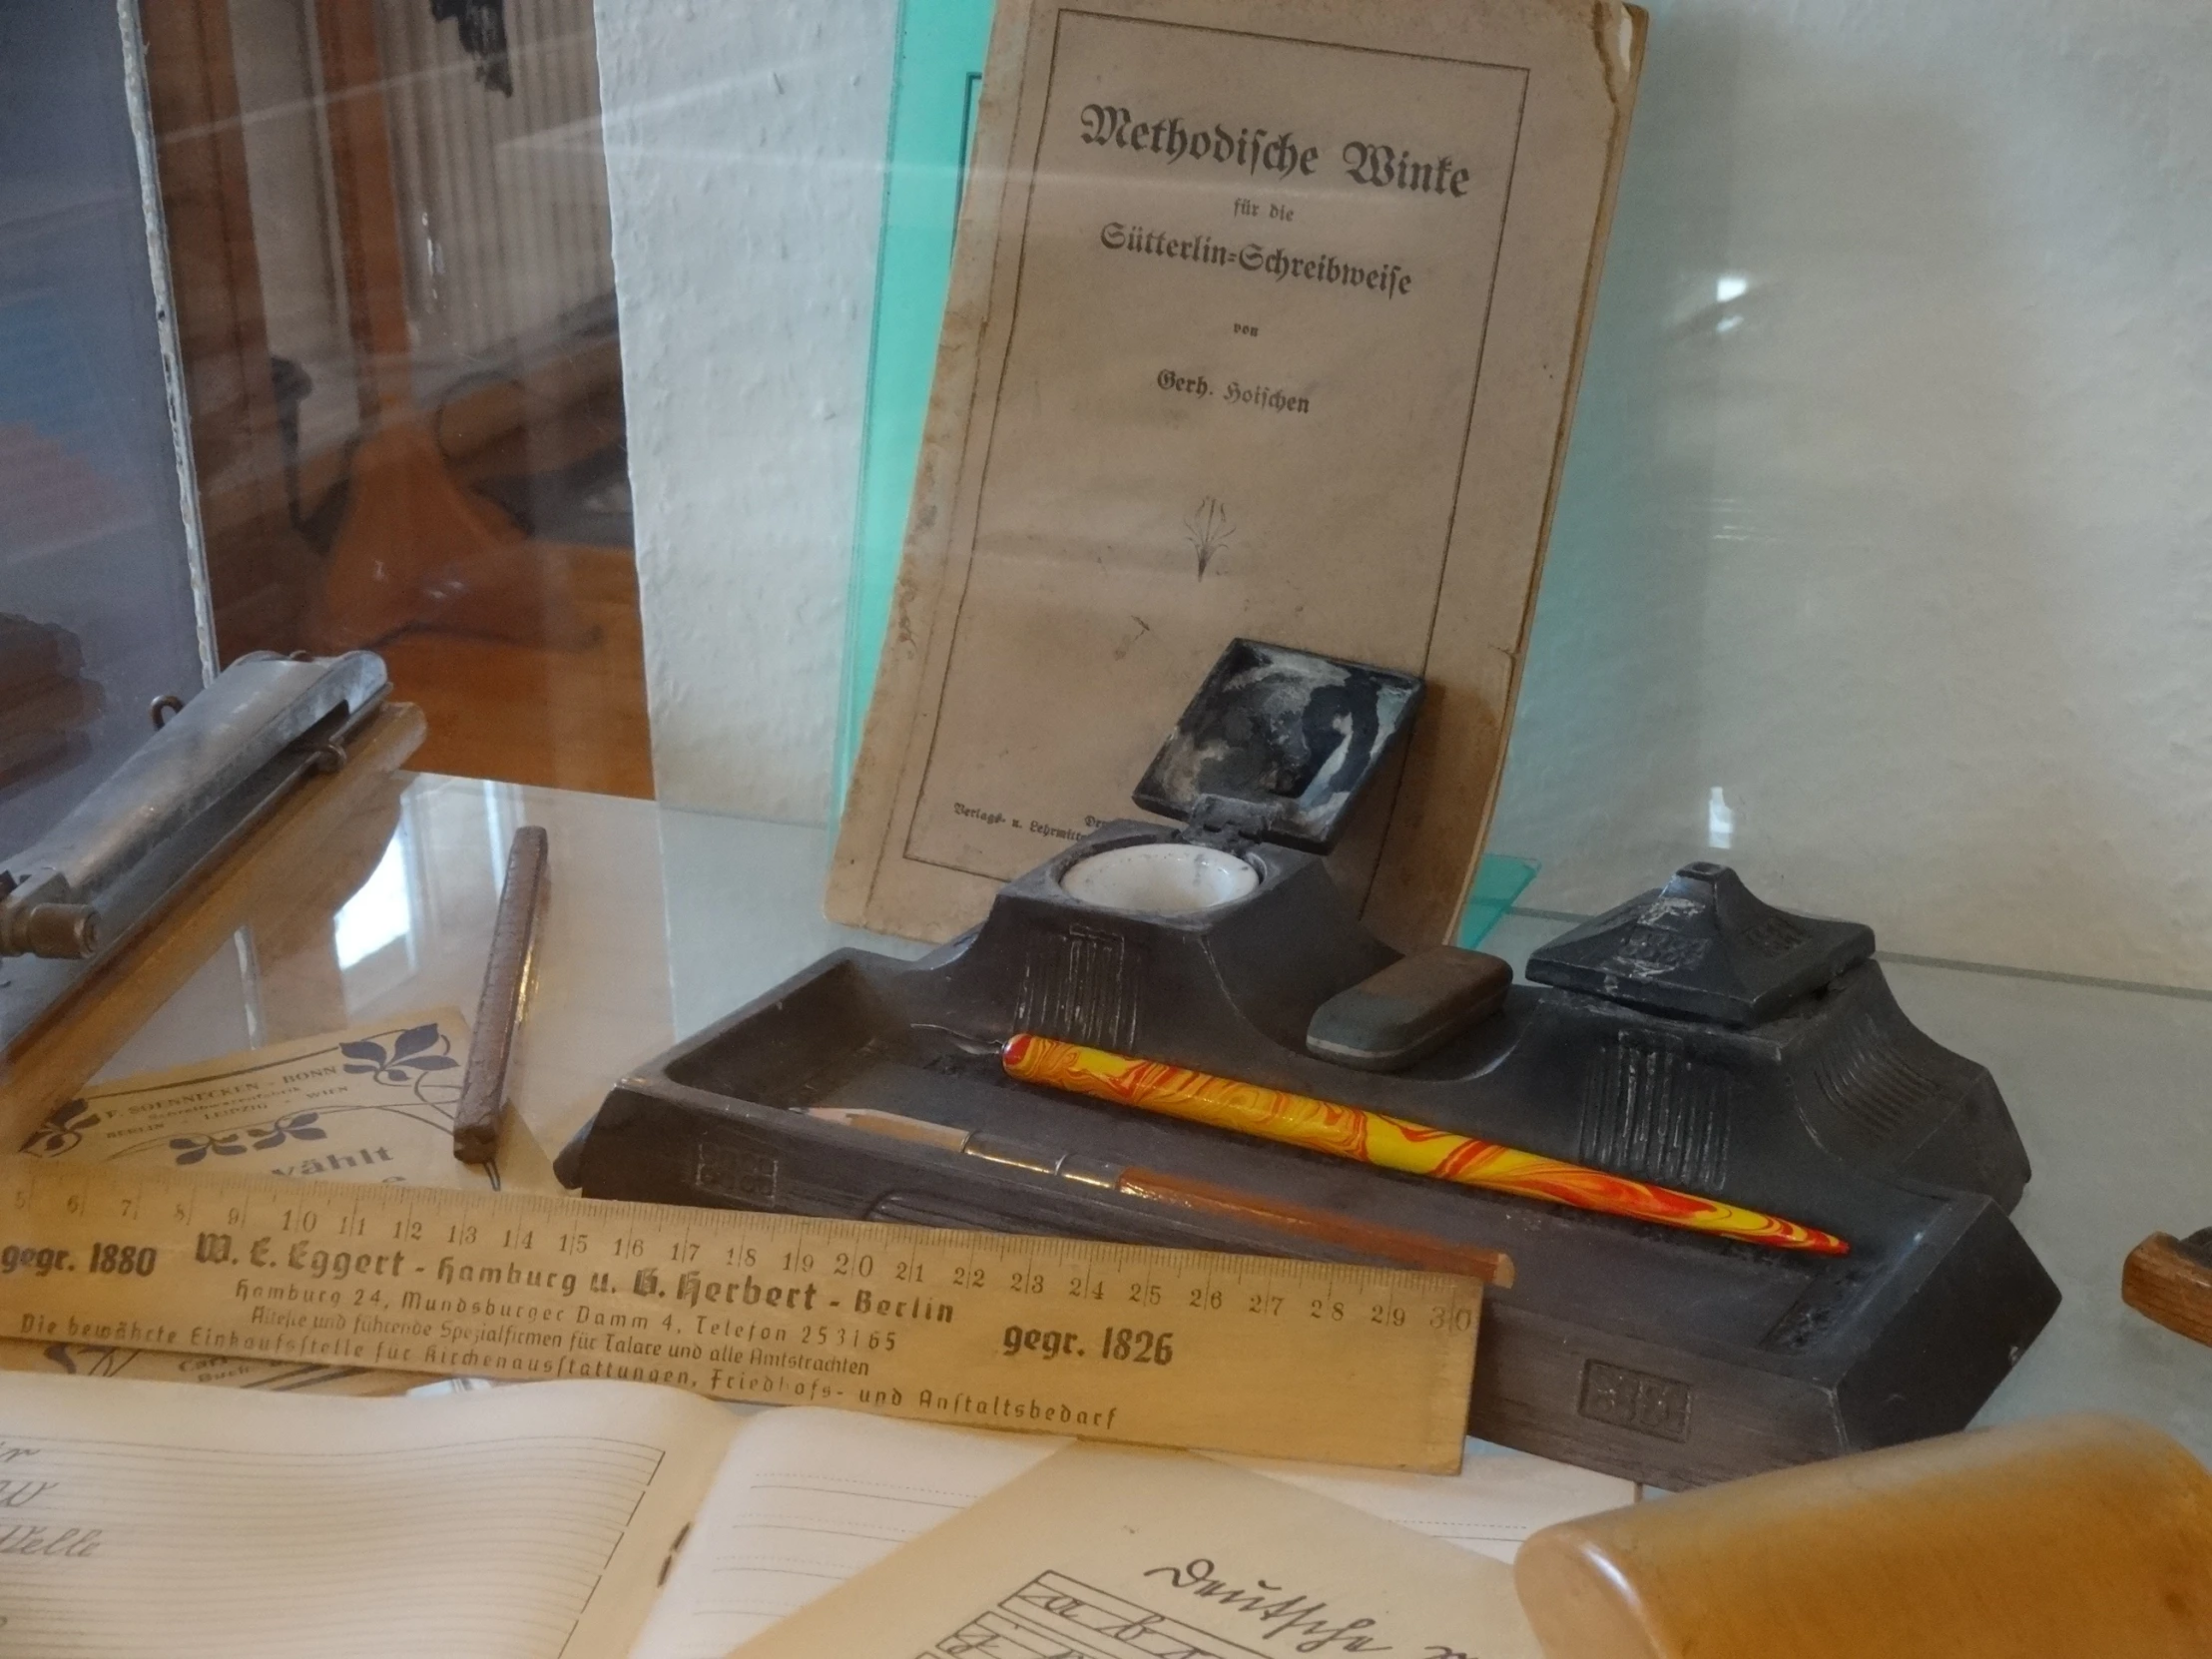 antique paper and inking supplies are on display